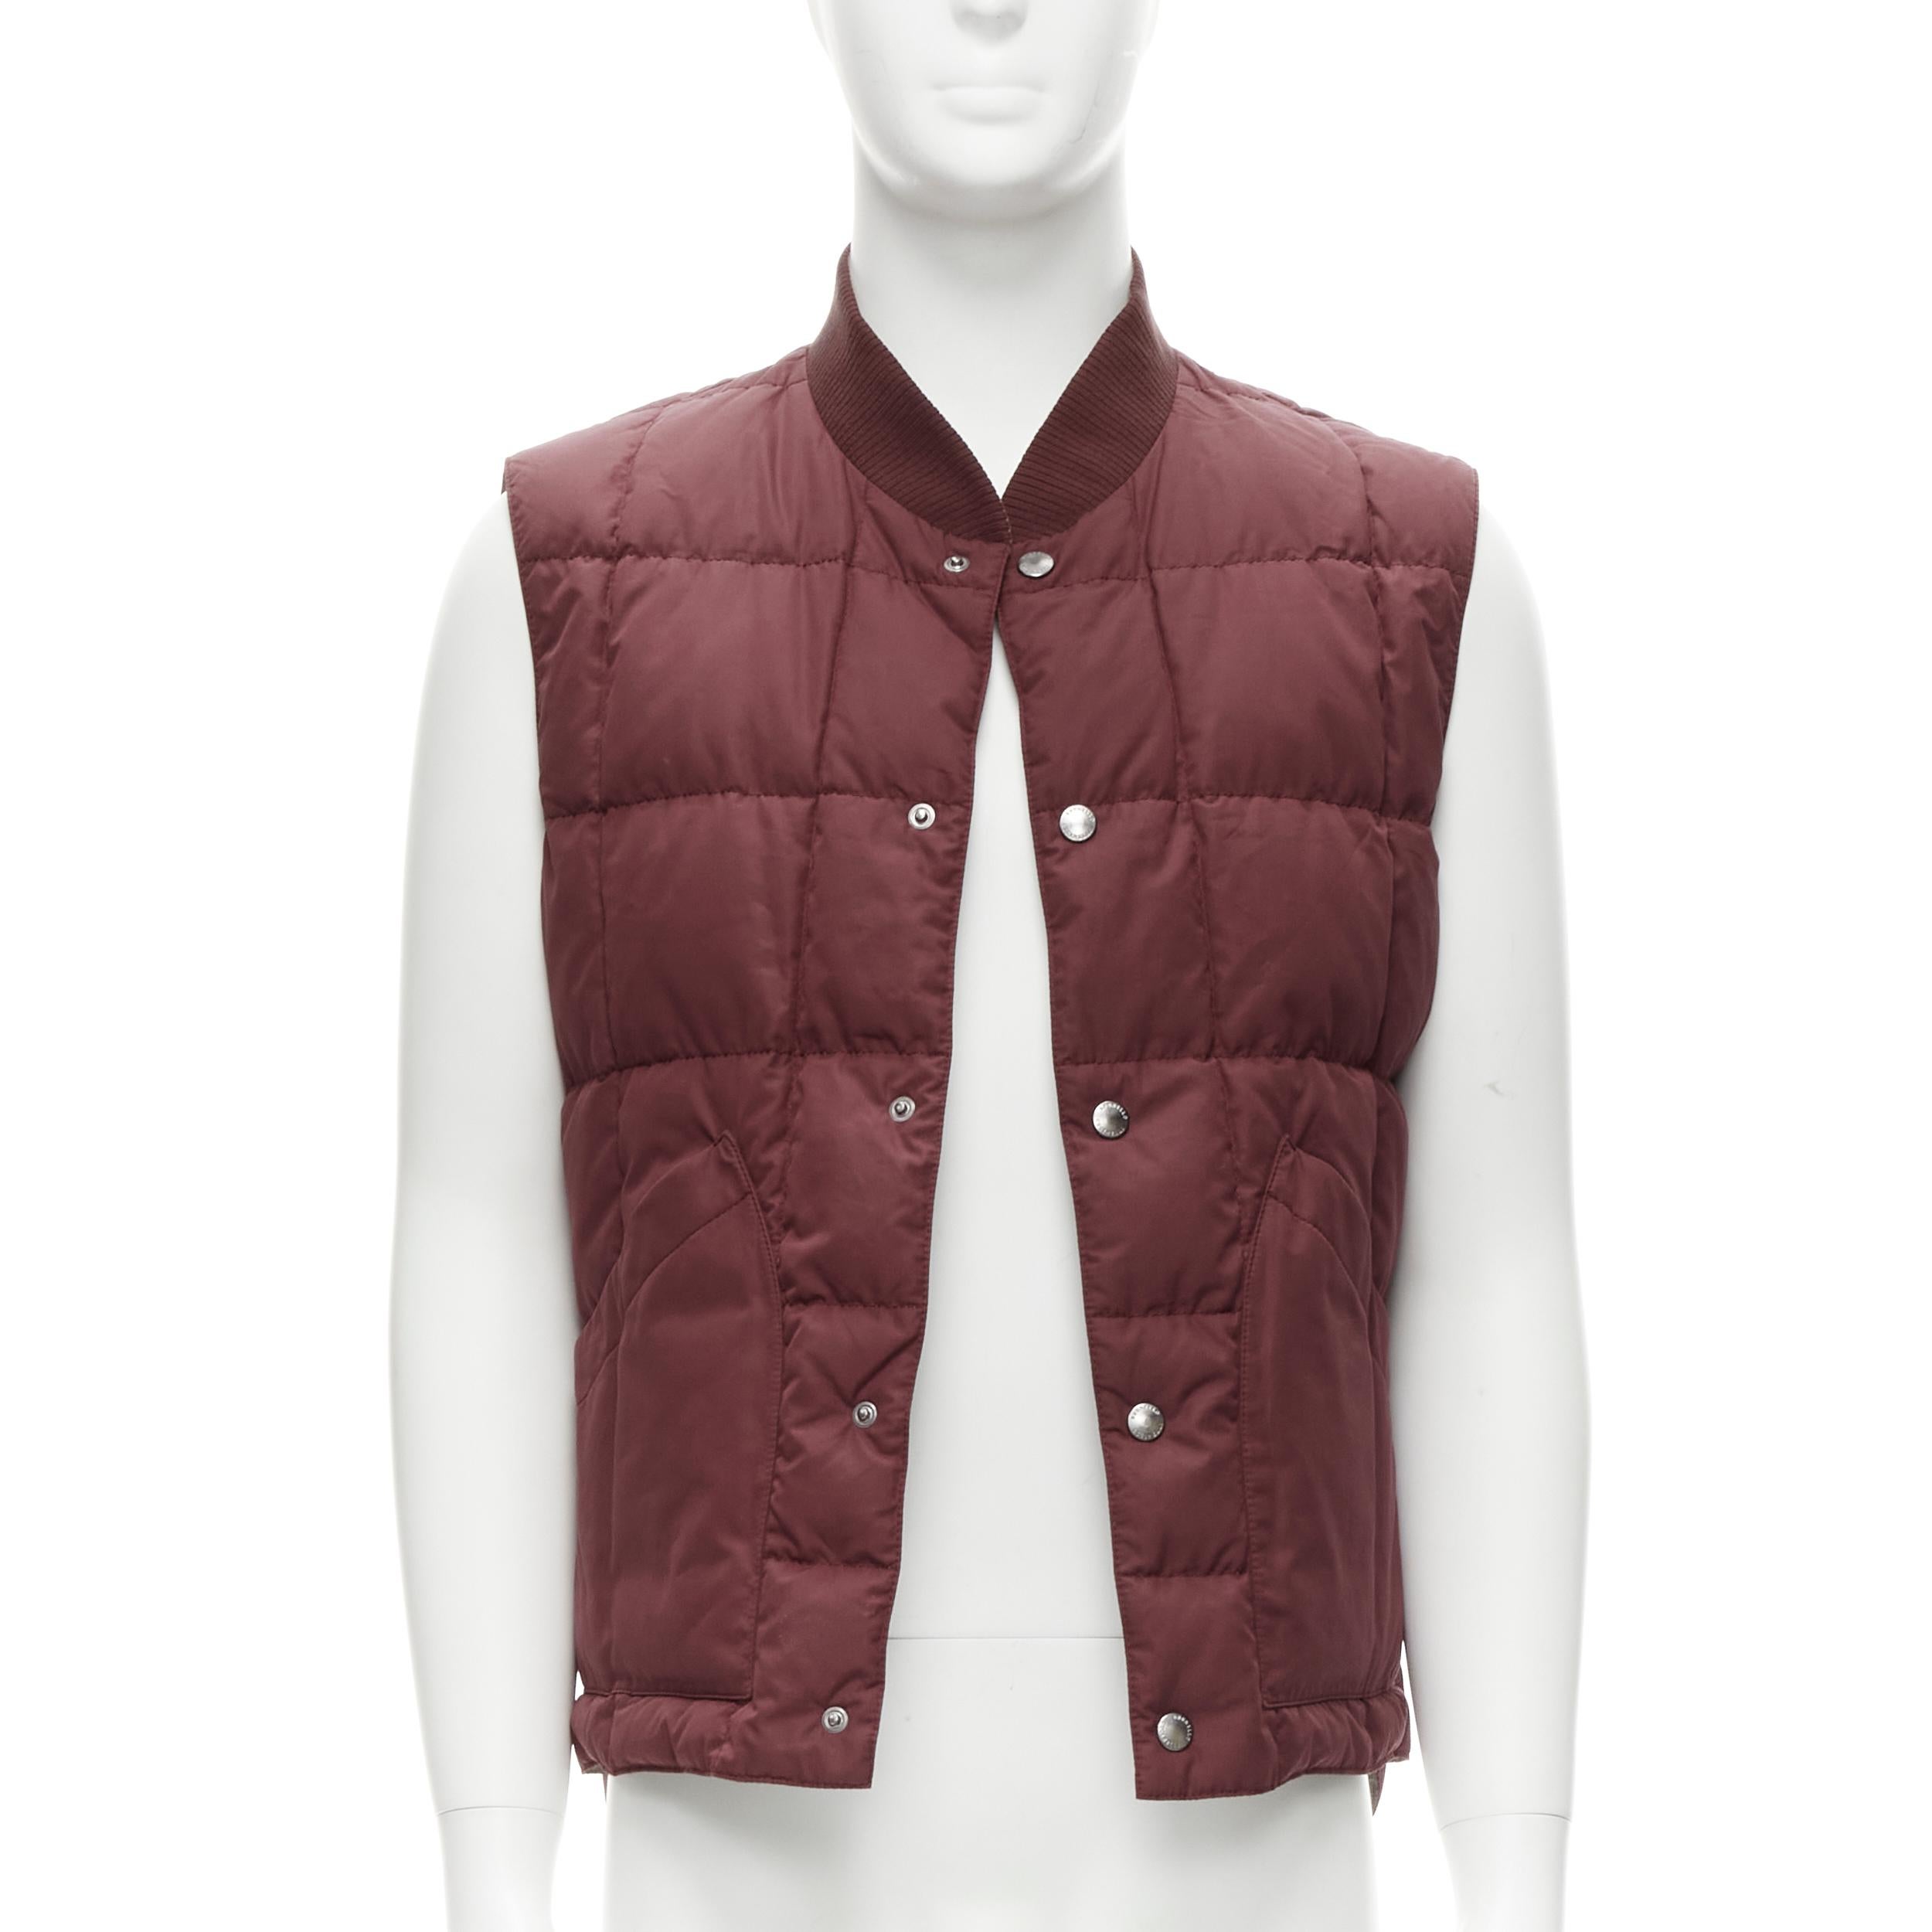 BRUNELLO CUCINELLI Reversible beige brick red reversible cotton padded gilet vest M
Reference: TGAS/C01762
Brand: Brunello Cucinelli
Material: Cotton
Color: Beige, Red
Pattern: Solid
Closure: Snap Buttons
Lining: Cotton
Extra Details: Fully